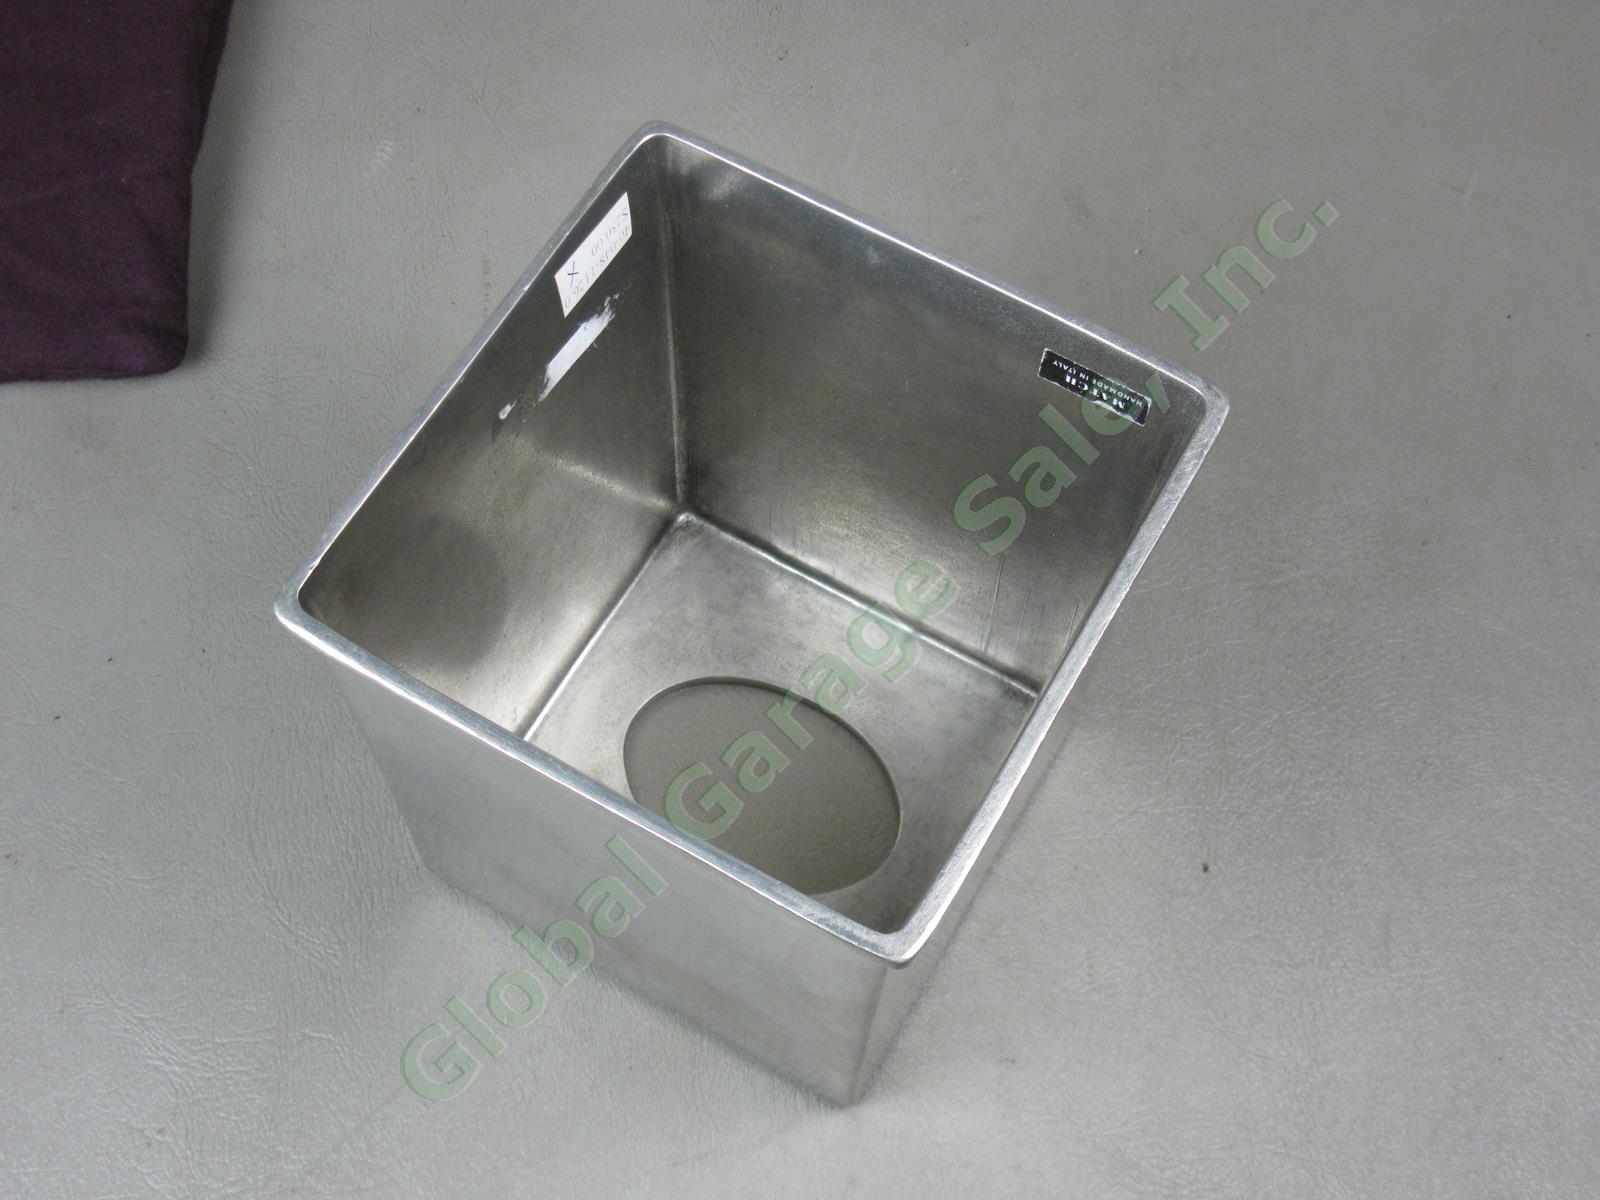 NEW Match Pewter Square Tissue Box Cover Holder Handmade In Italy Retail $280 NR 4